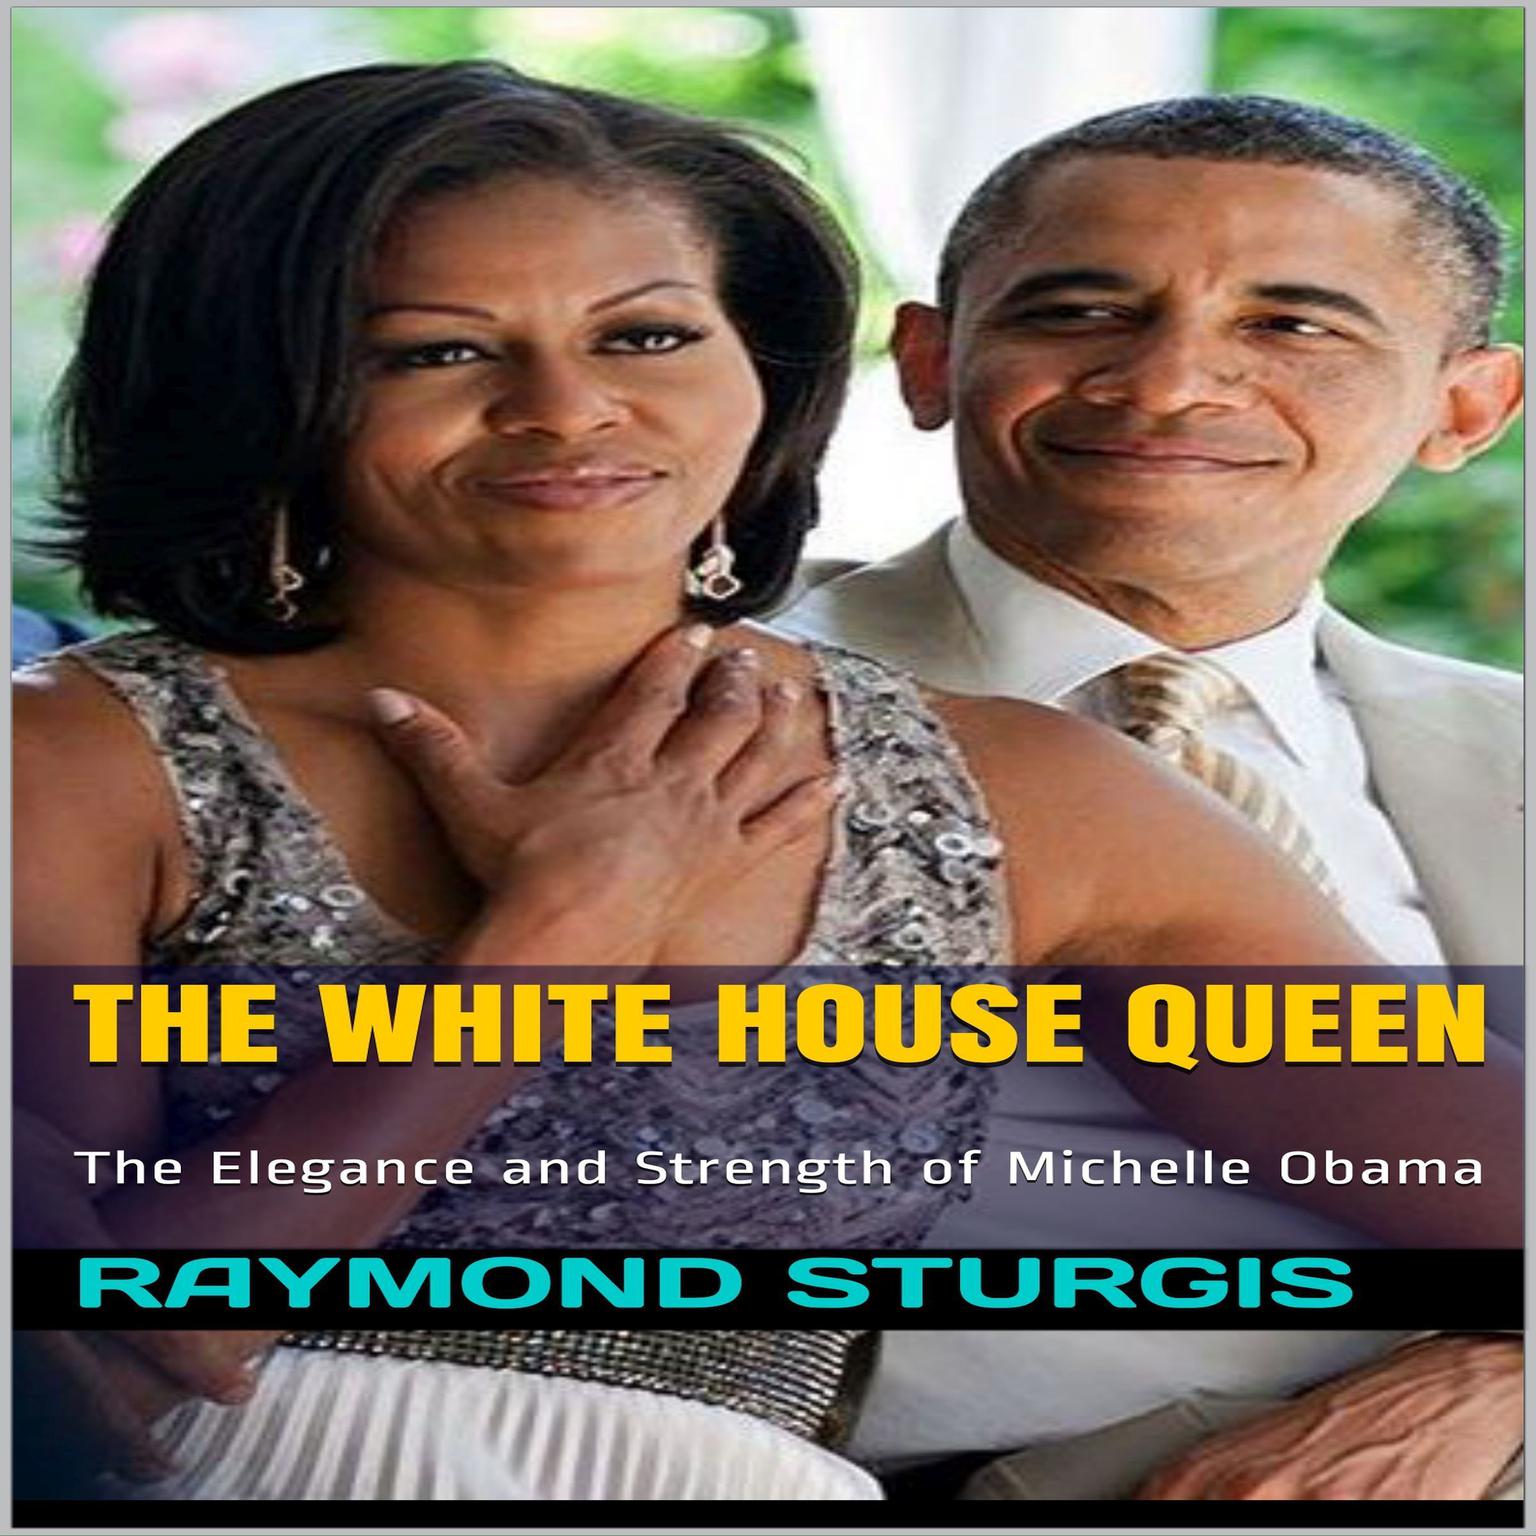 The White House Queen: The Elegance and Strength of Michelle Obama Audiobook, by Raymond Sturgis